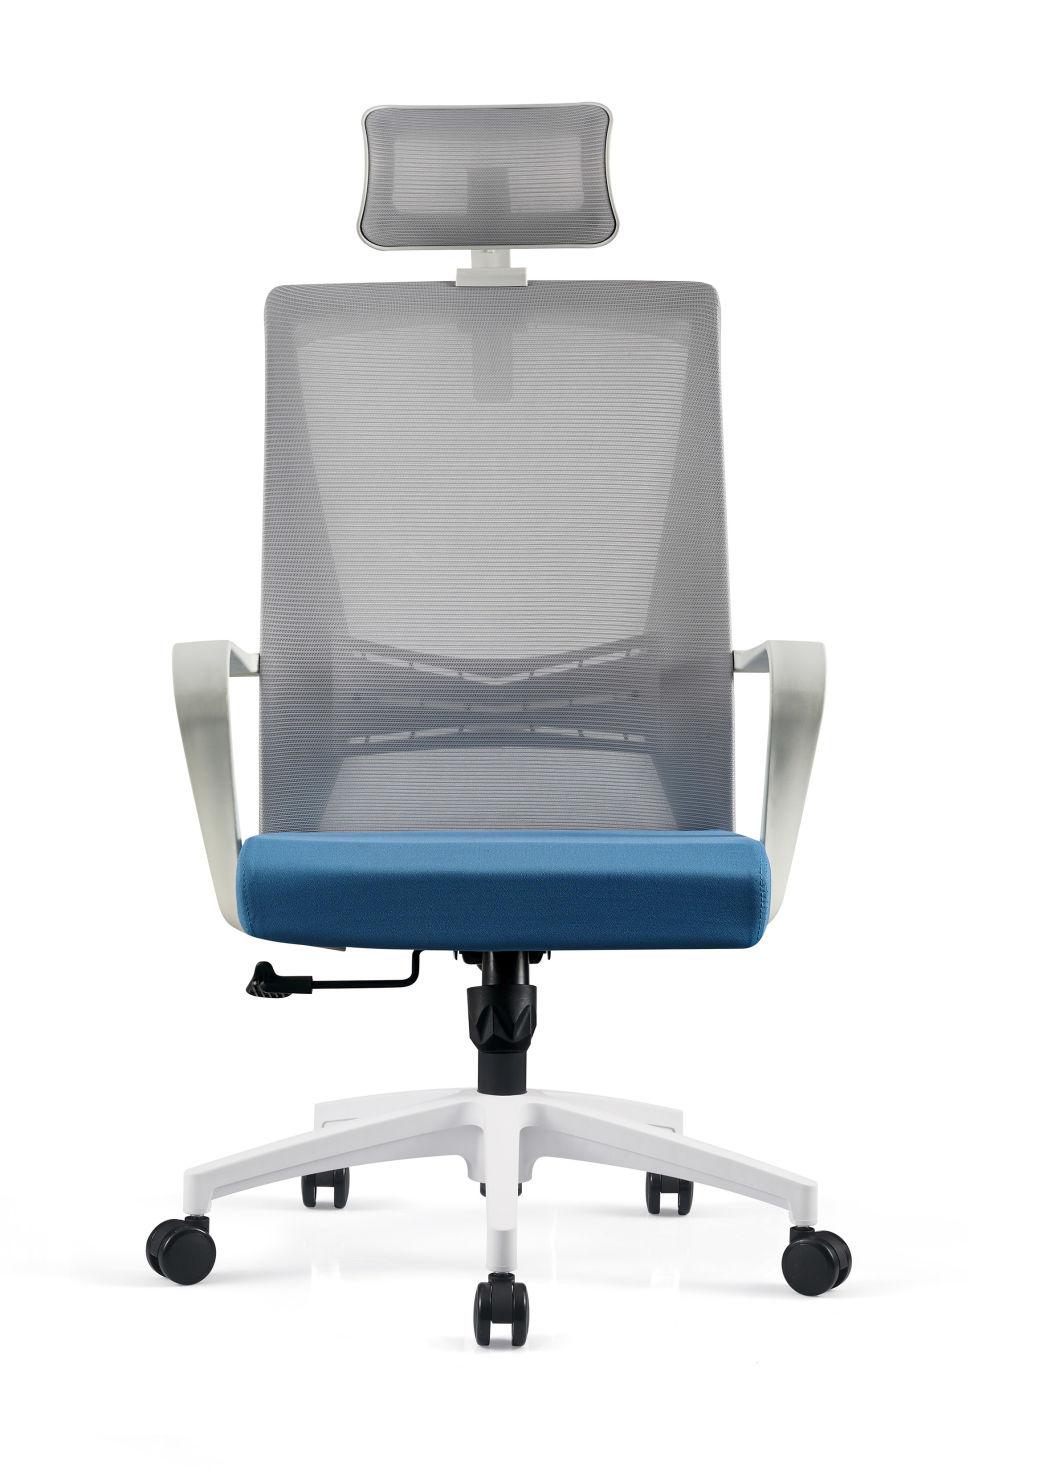 Breathable Mesh Fabric Office Chair with Hangers Flexible Pillow Chair